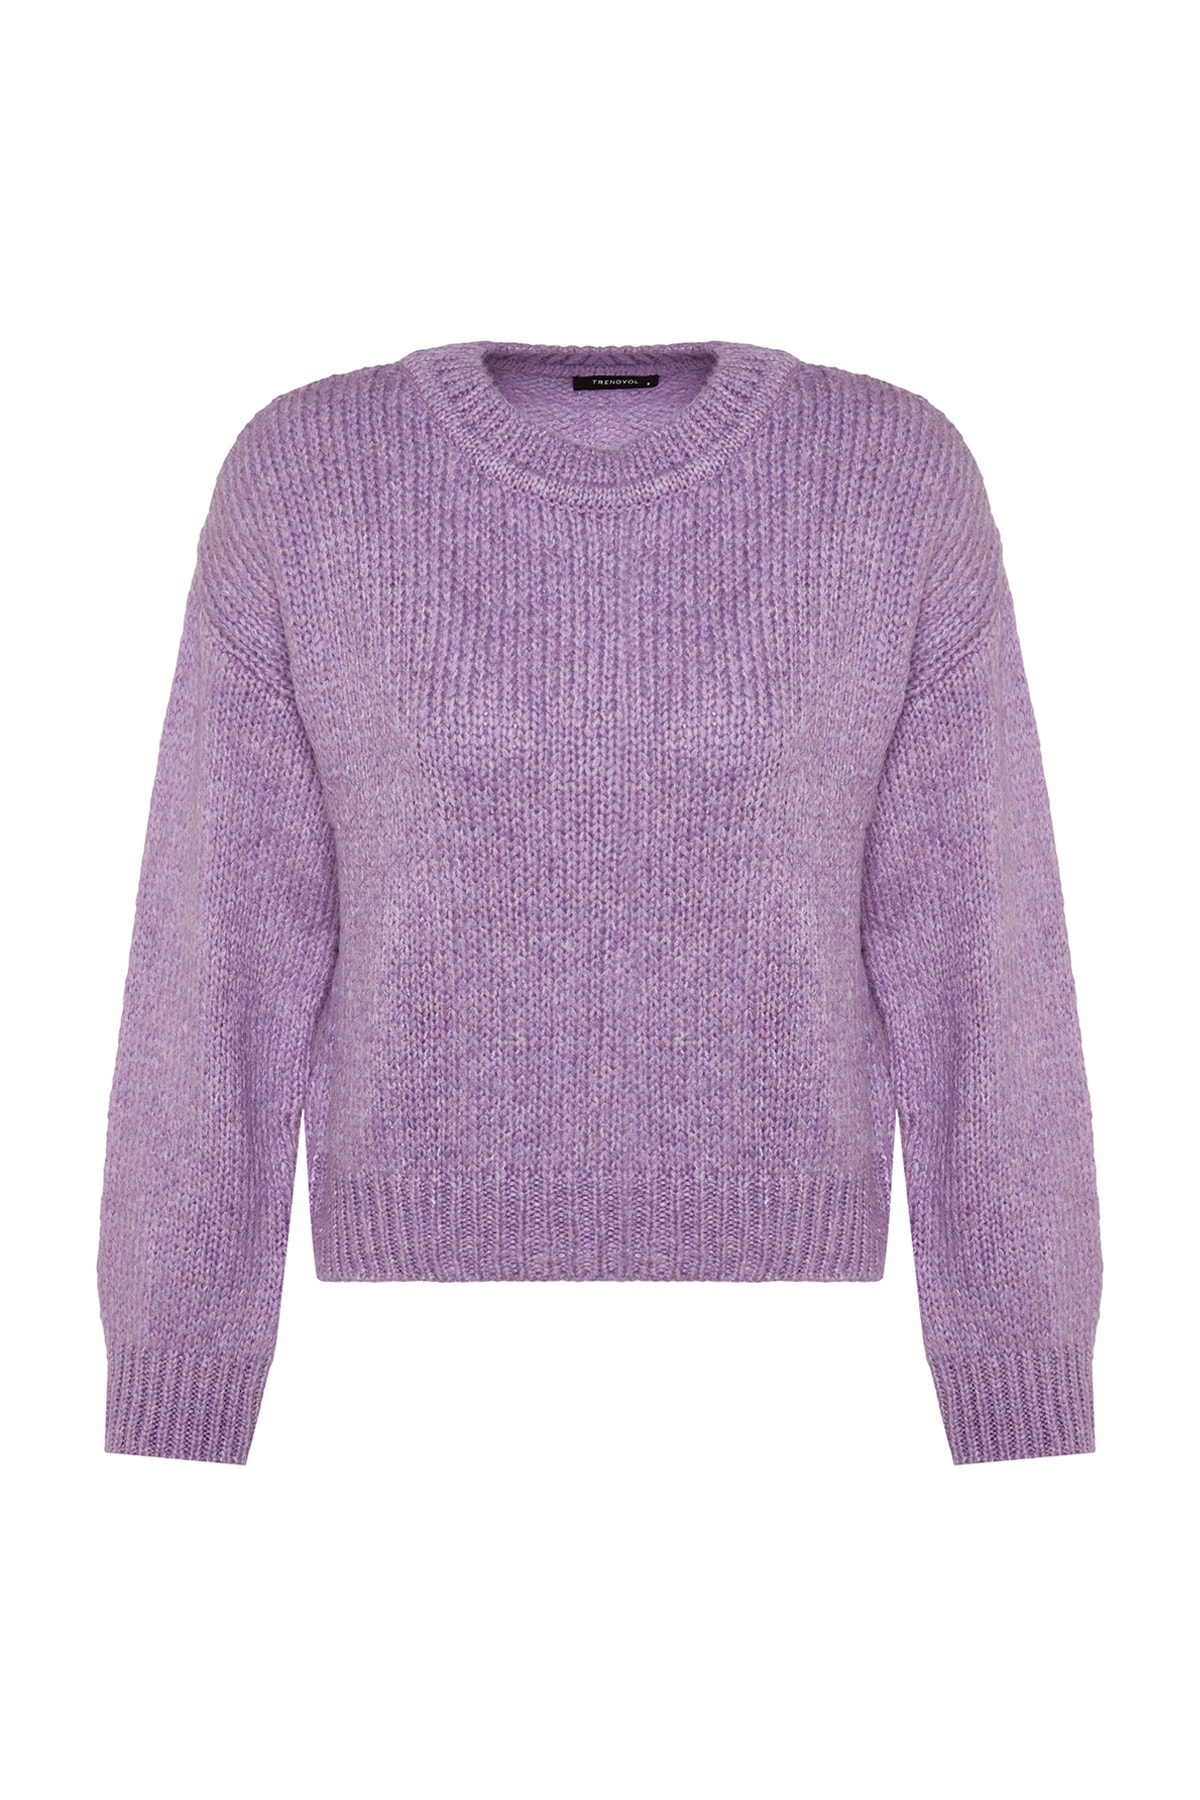 Trendyol Lilac Wide Fit Soft Textured Basic Knitwear Sweater